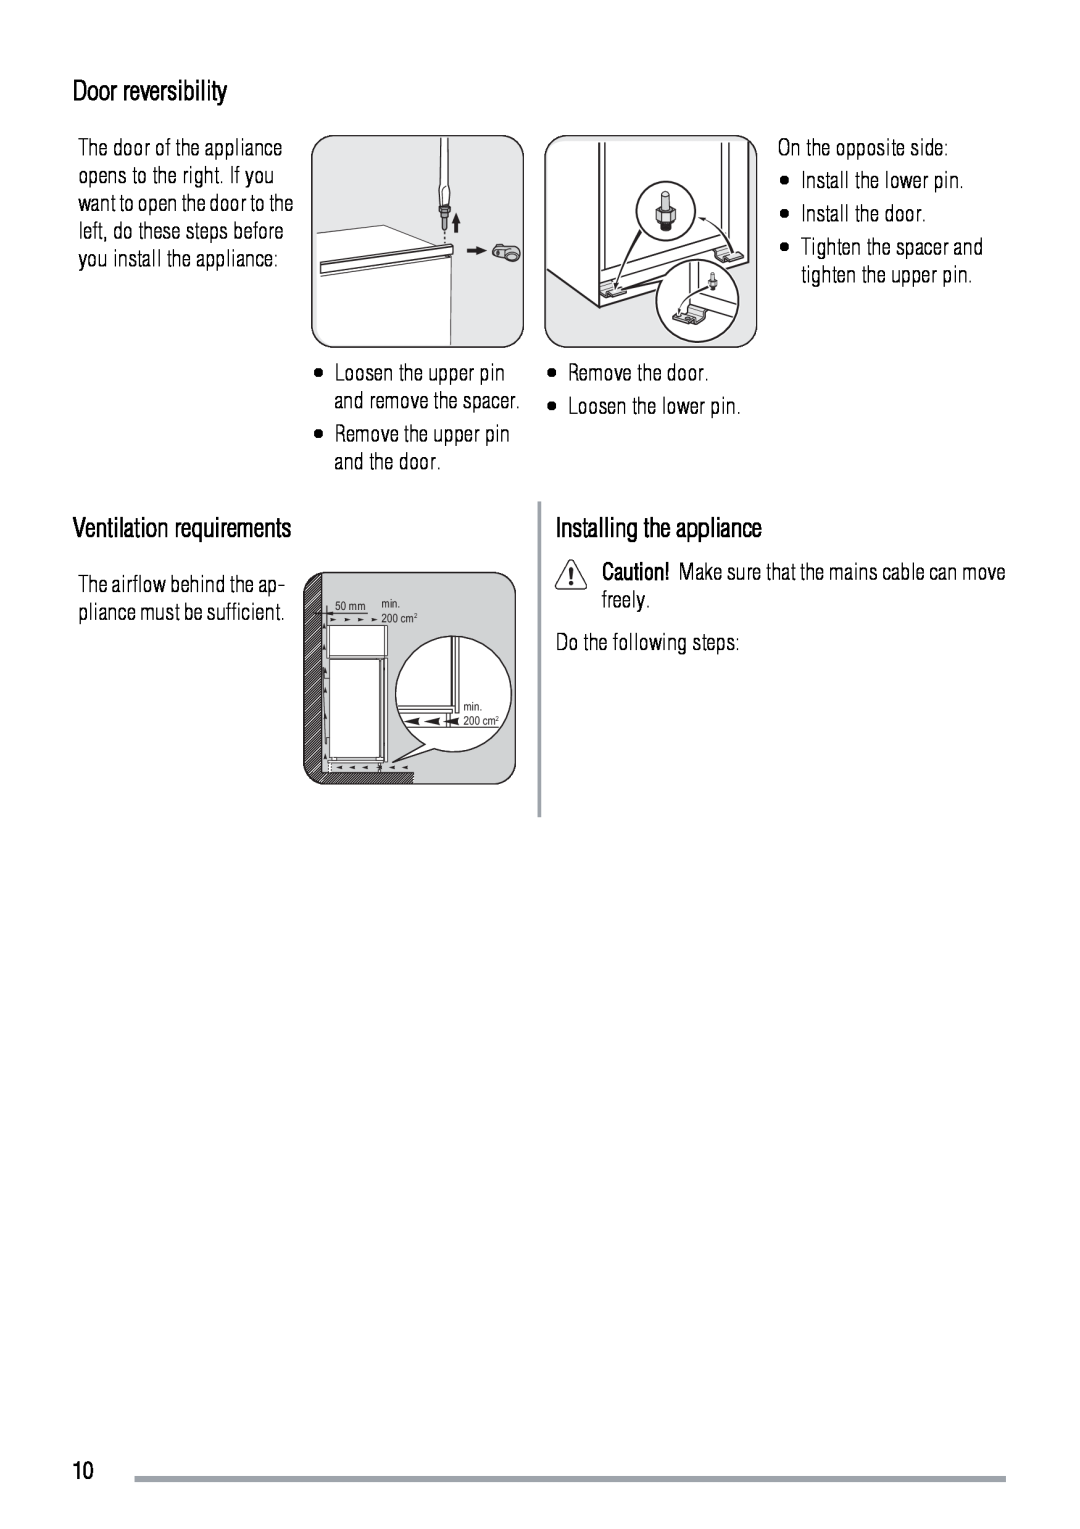 Zanussi ZBF6124A user manual Door reversibility, Installing the appliance, and the door, Do the following steps 